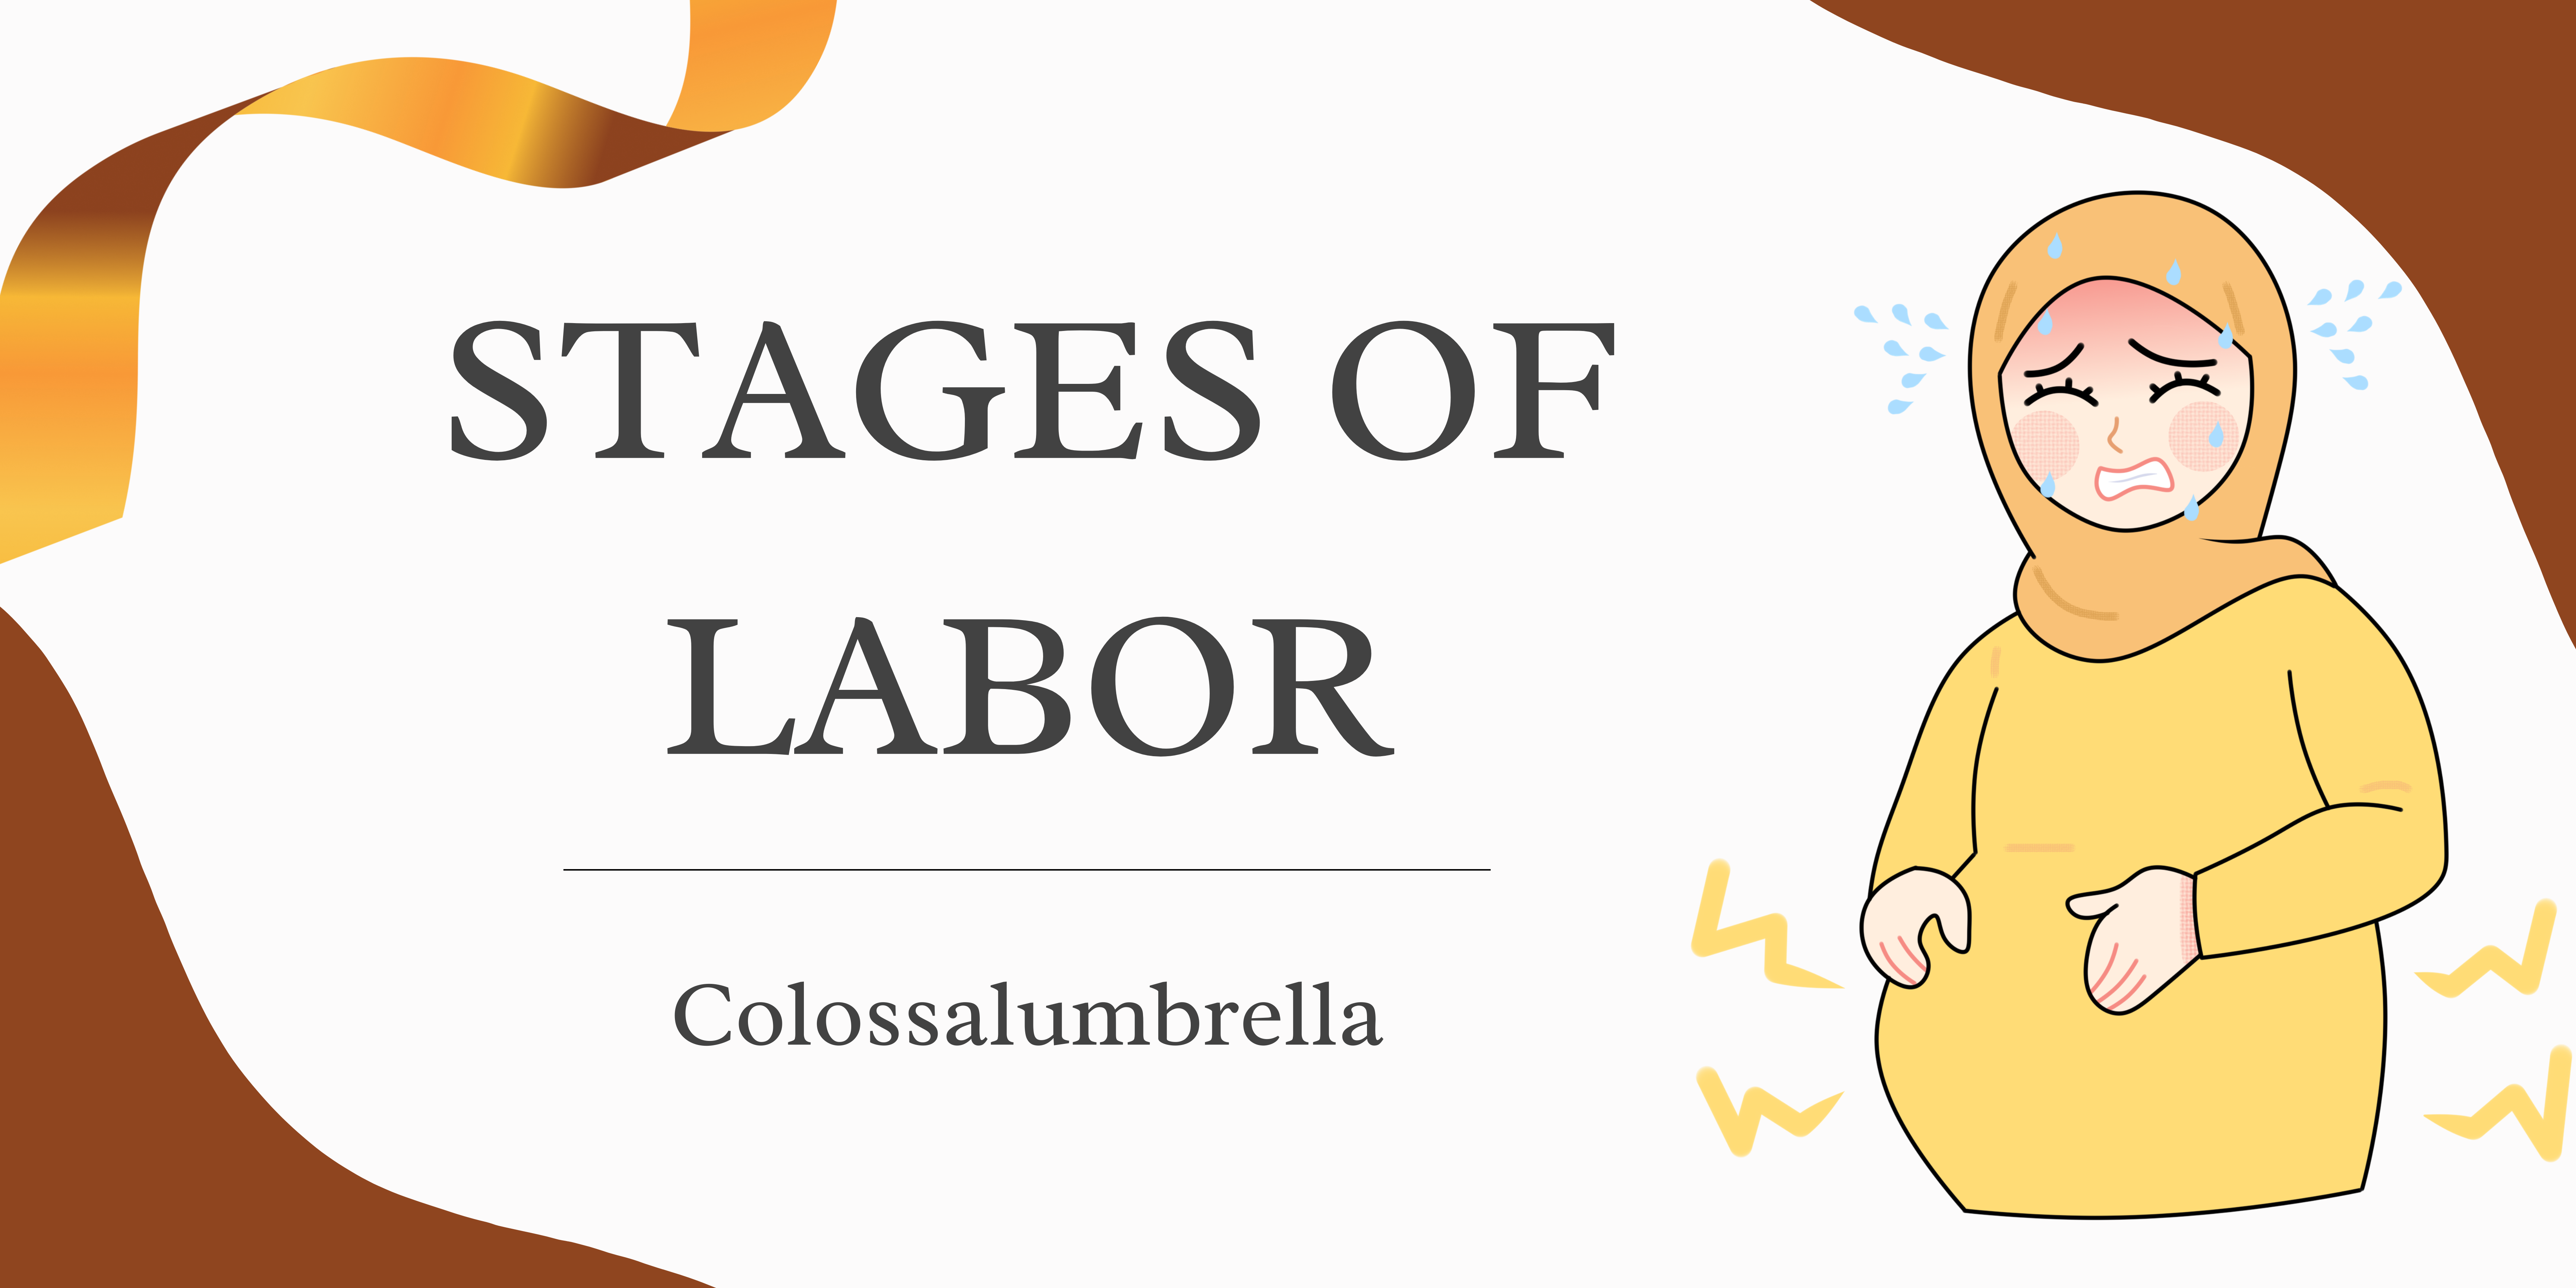 4 Stages of Labor